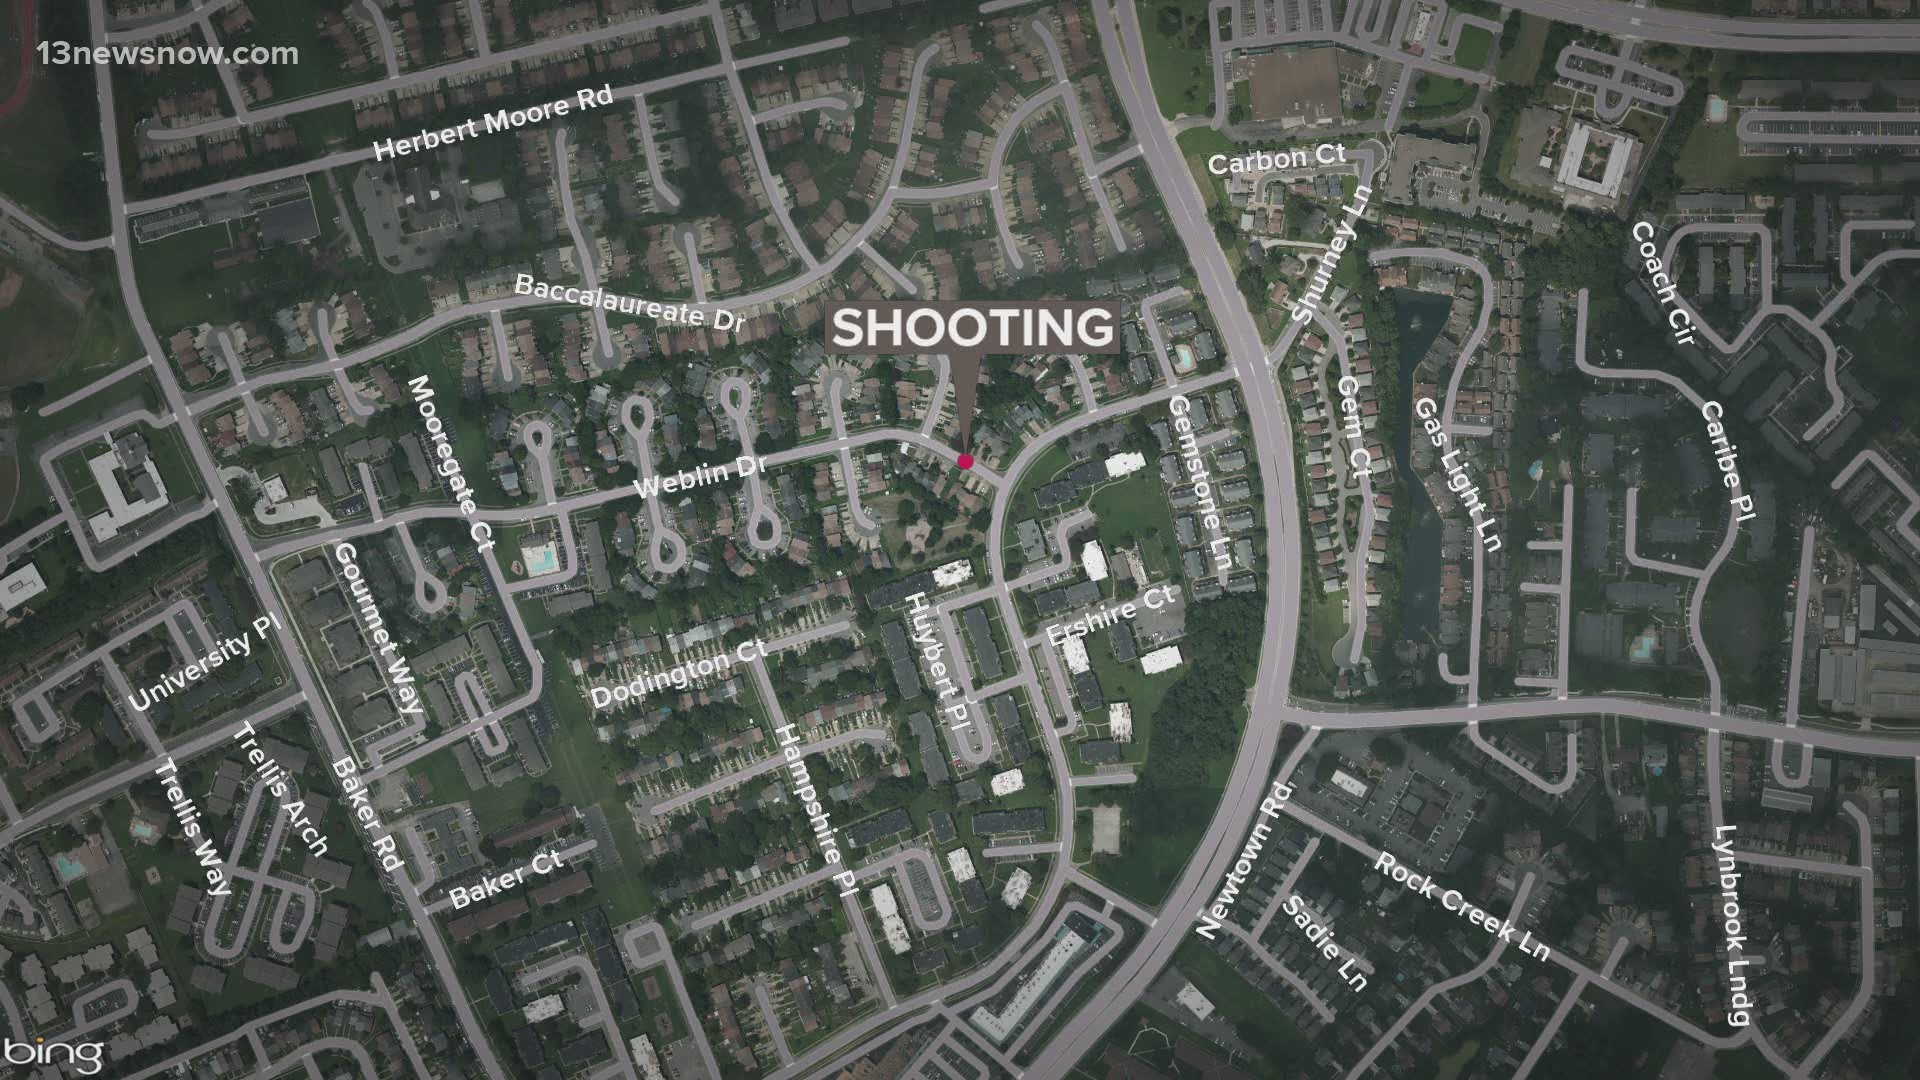 One person was hurt in the shooting. The call came in just before 11:30 p.m. Monday.